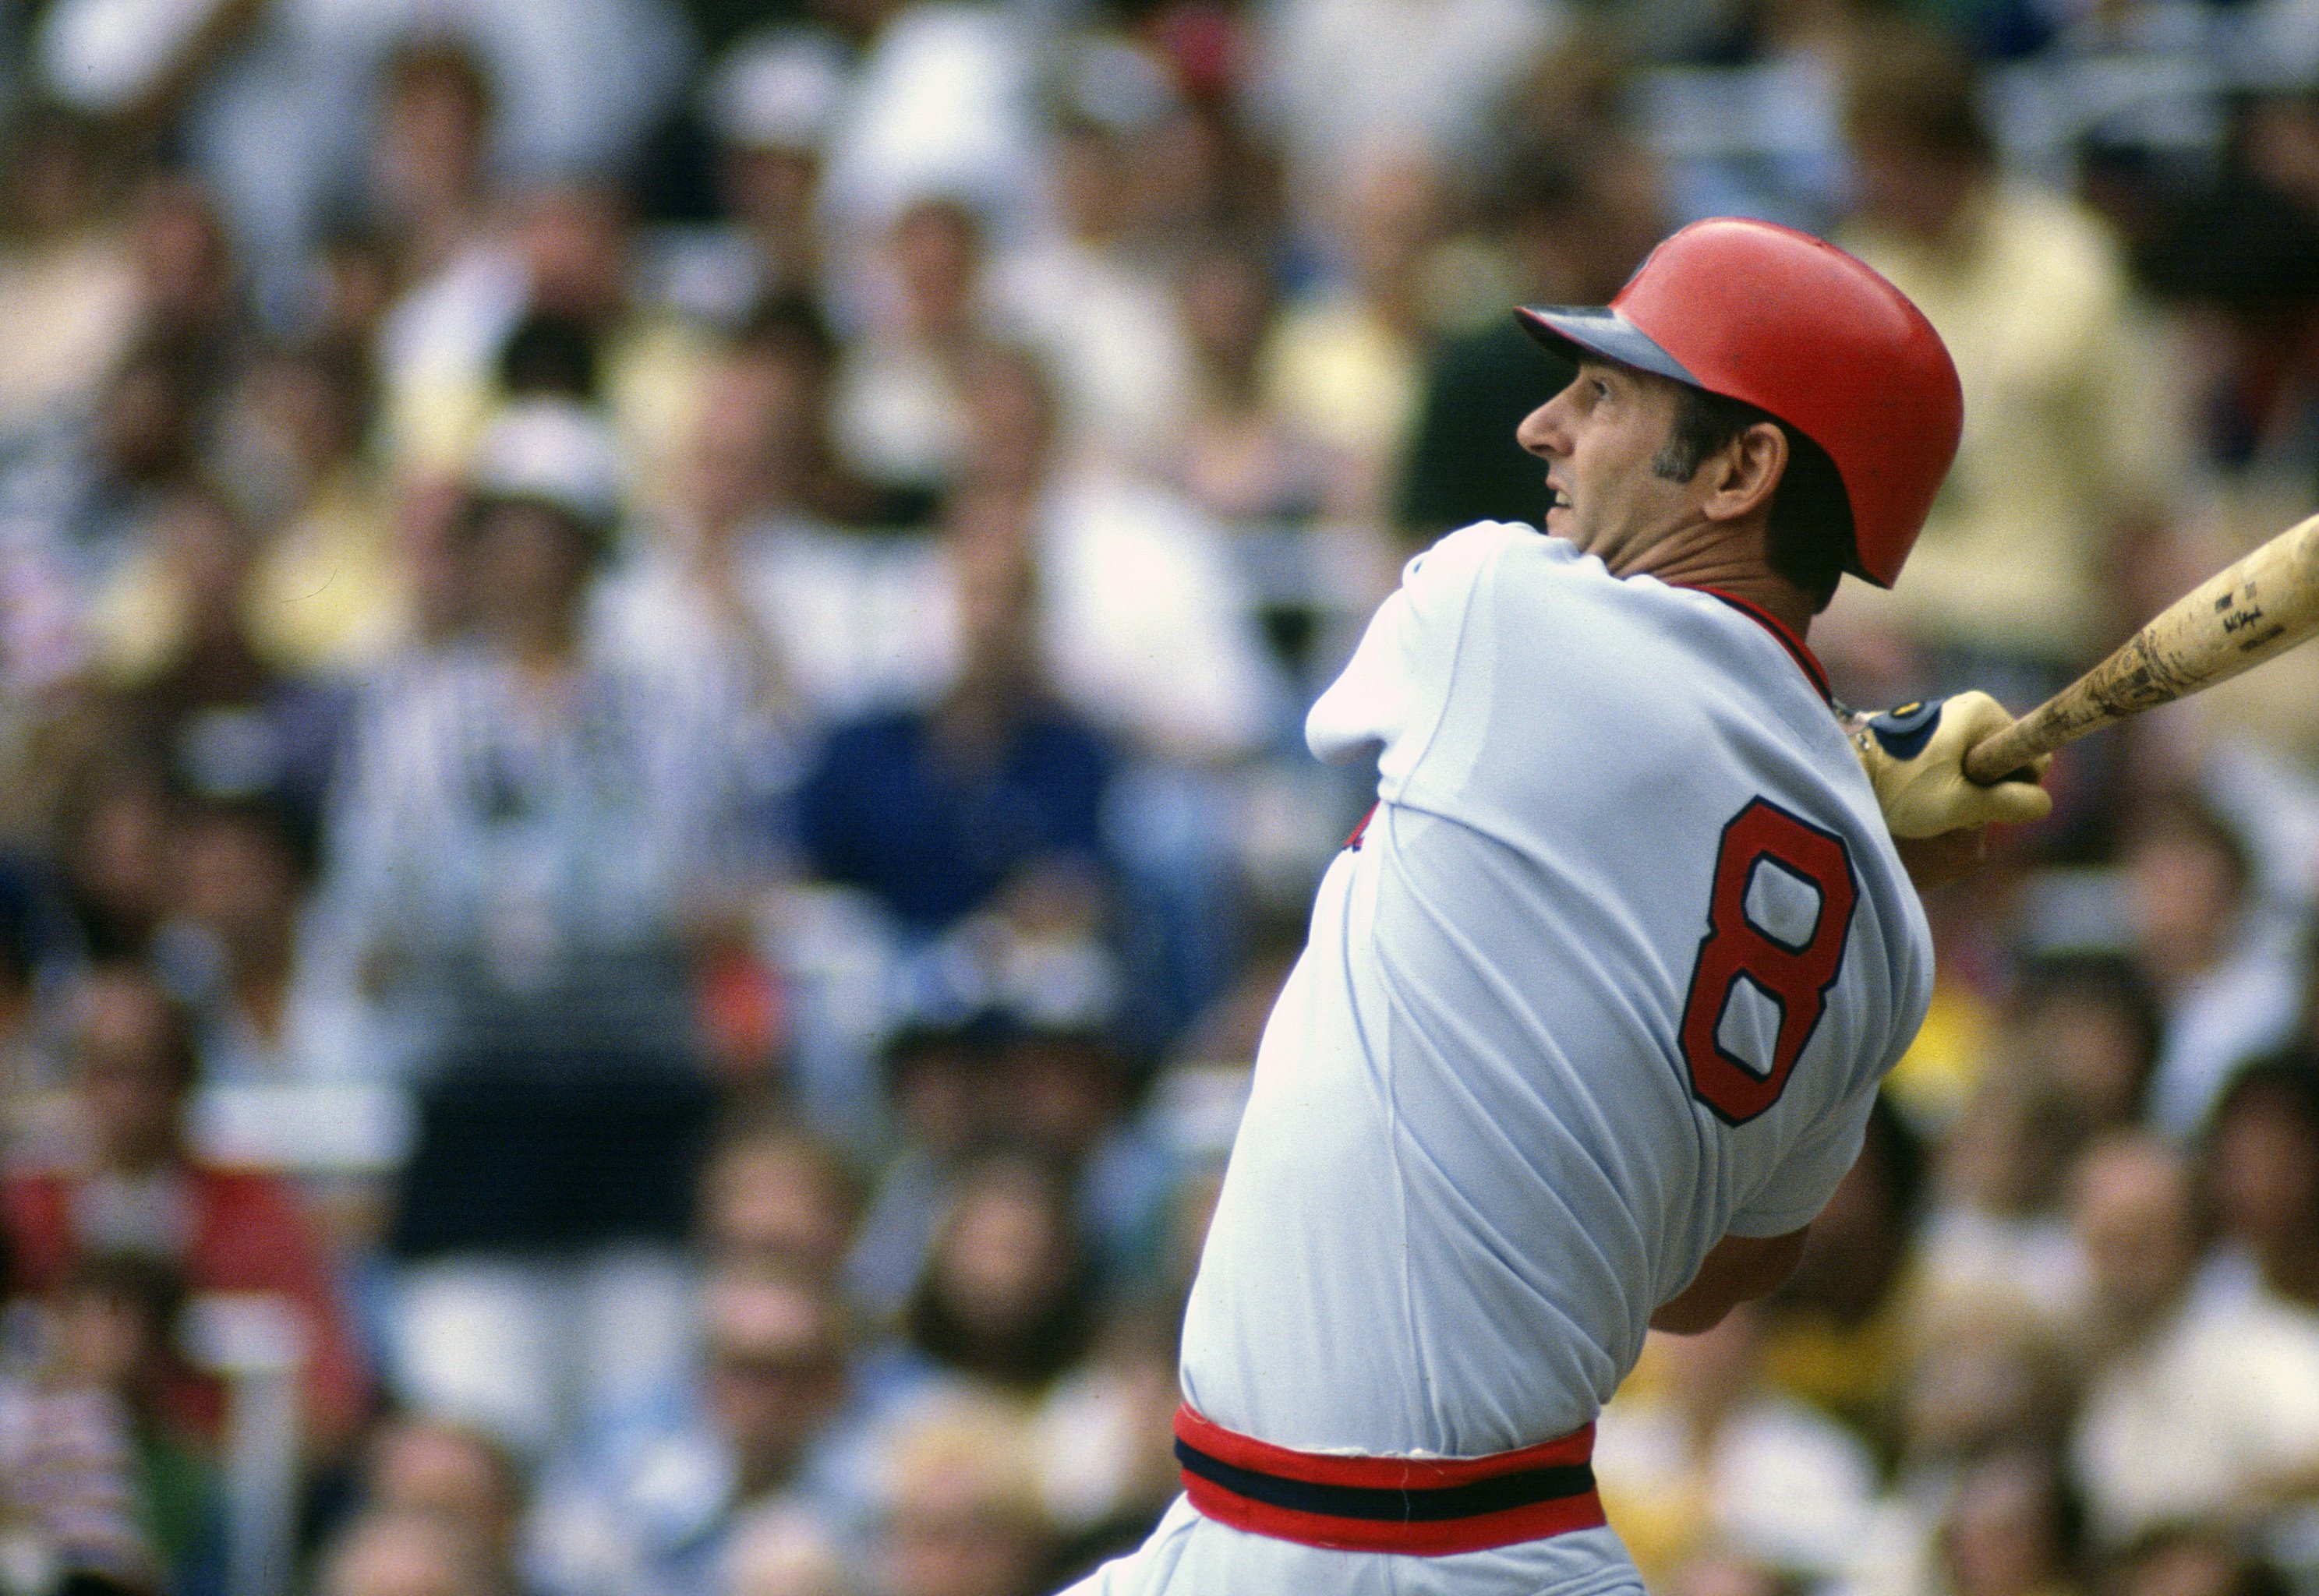 1970s Baseball - Happy Birthday to 'Beltin' Bill Melton, a 10 year major  league third baseman who topped 20 HR in a season 5 times for the Chicago White  Sox. Melton hit